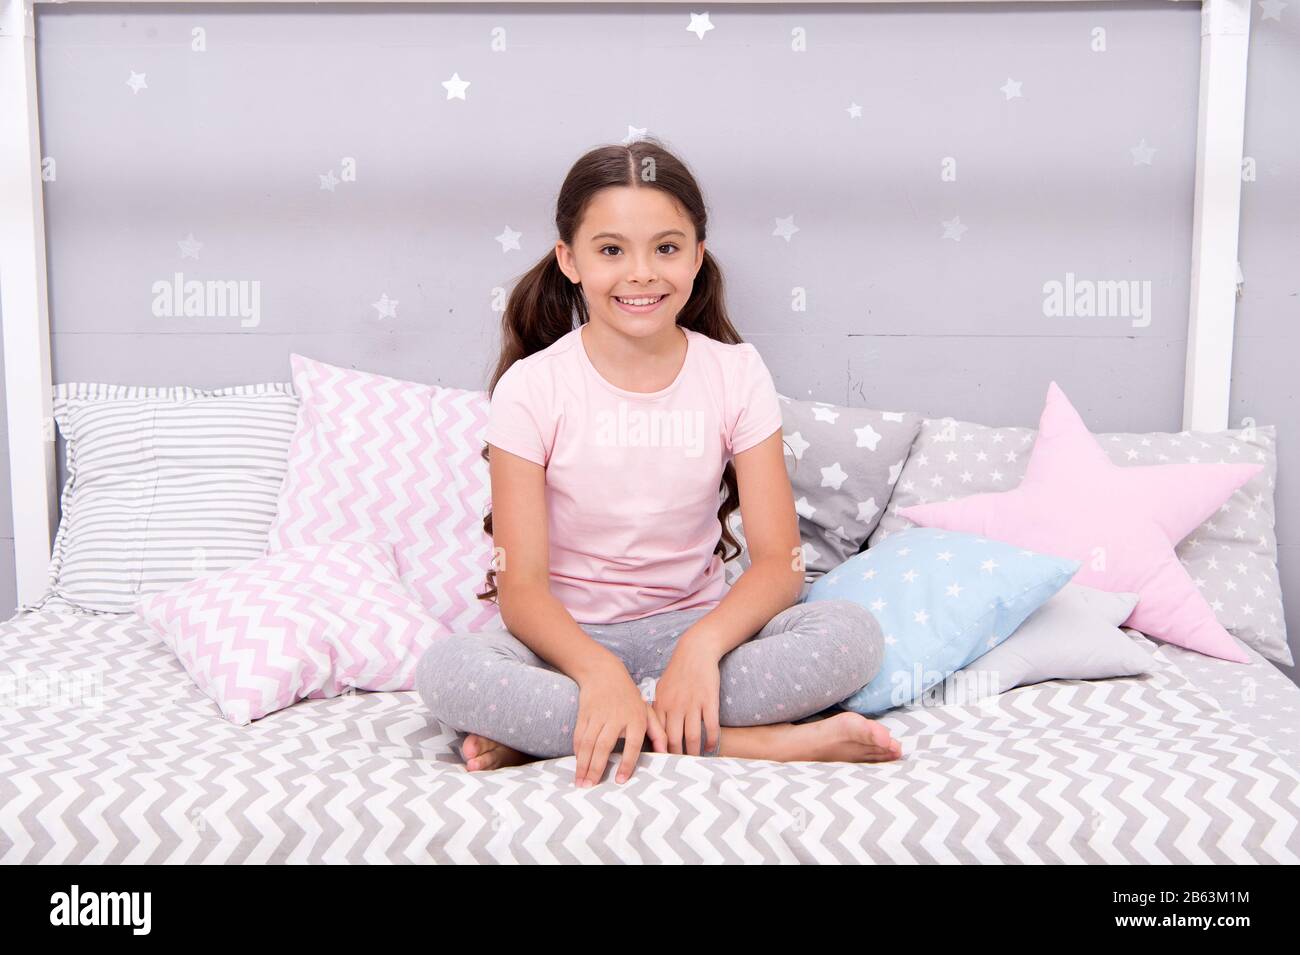 Feeling relaxed in pajamas. Little child wear pajamas to bed. Sleepwear and pajamas for kids. Home clothing. Nightwear. Bedtime routine. Fashion and style. Get your coziest sleep in stylish pajamas. Stock Photo